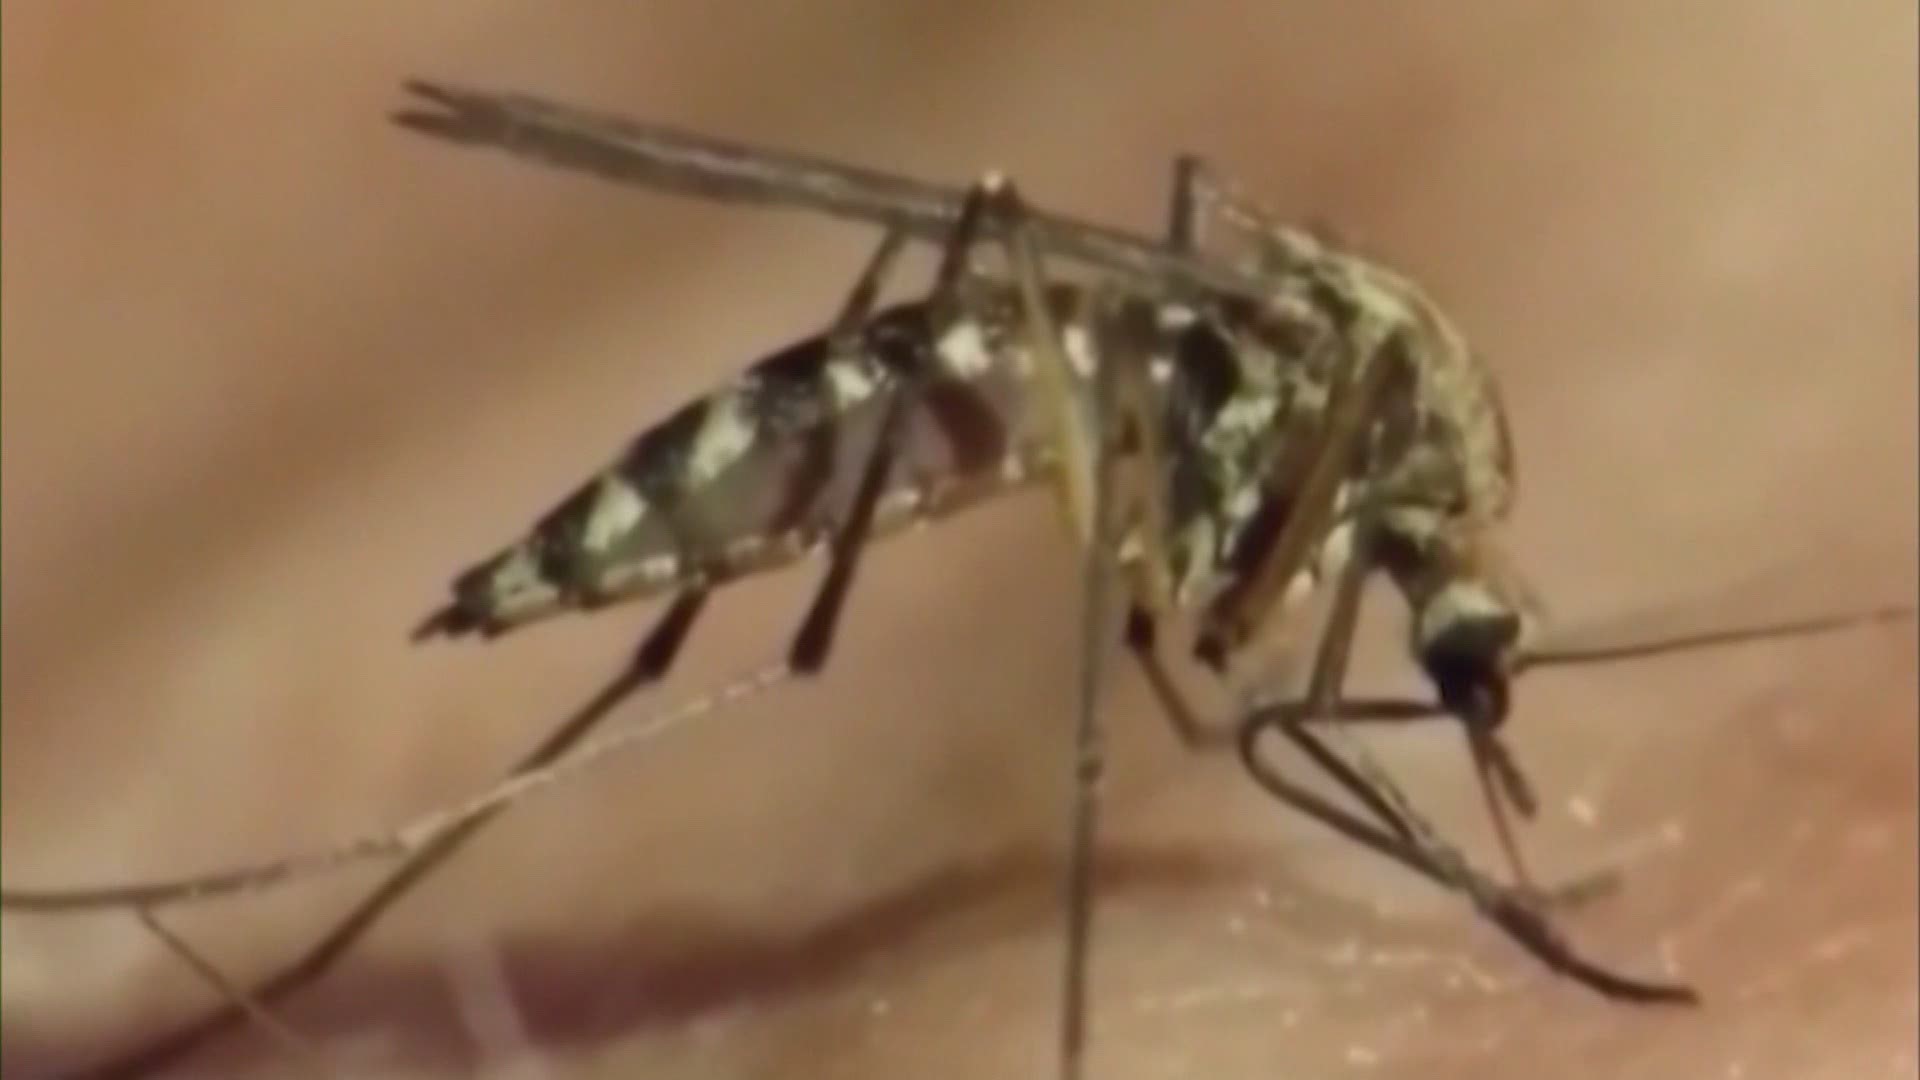 Harris County Public Health confirmed the West Nile virus has been found in dozens of mosquitoes and birds in the county this year.